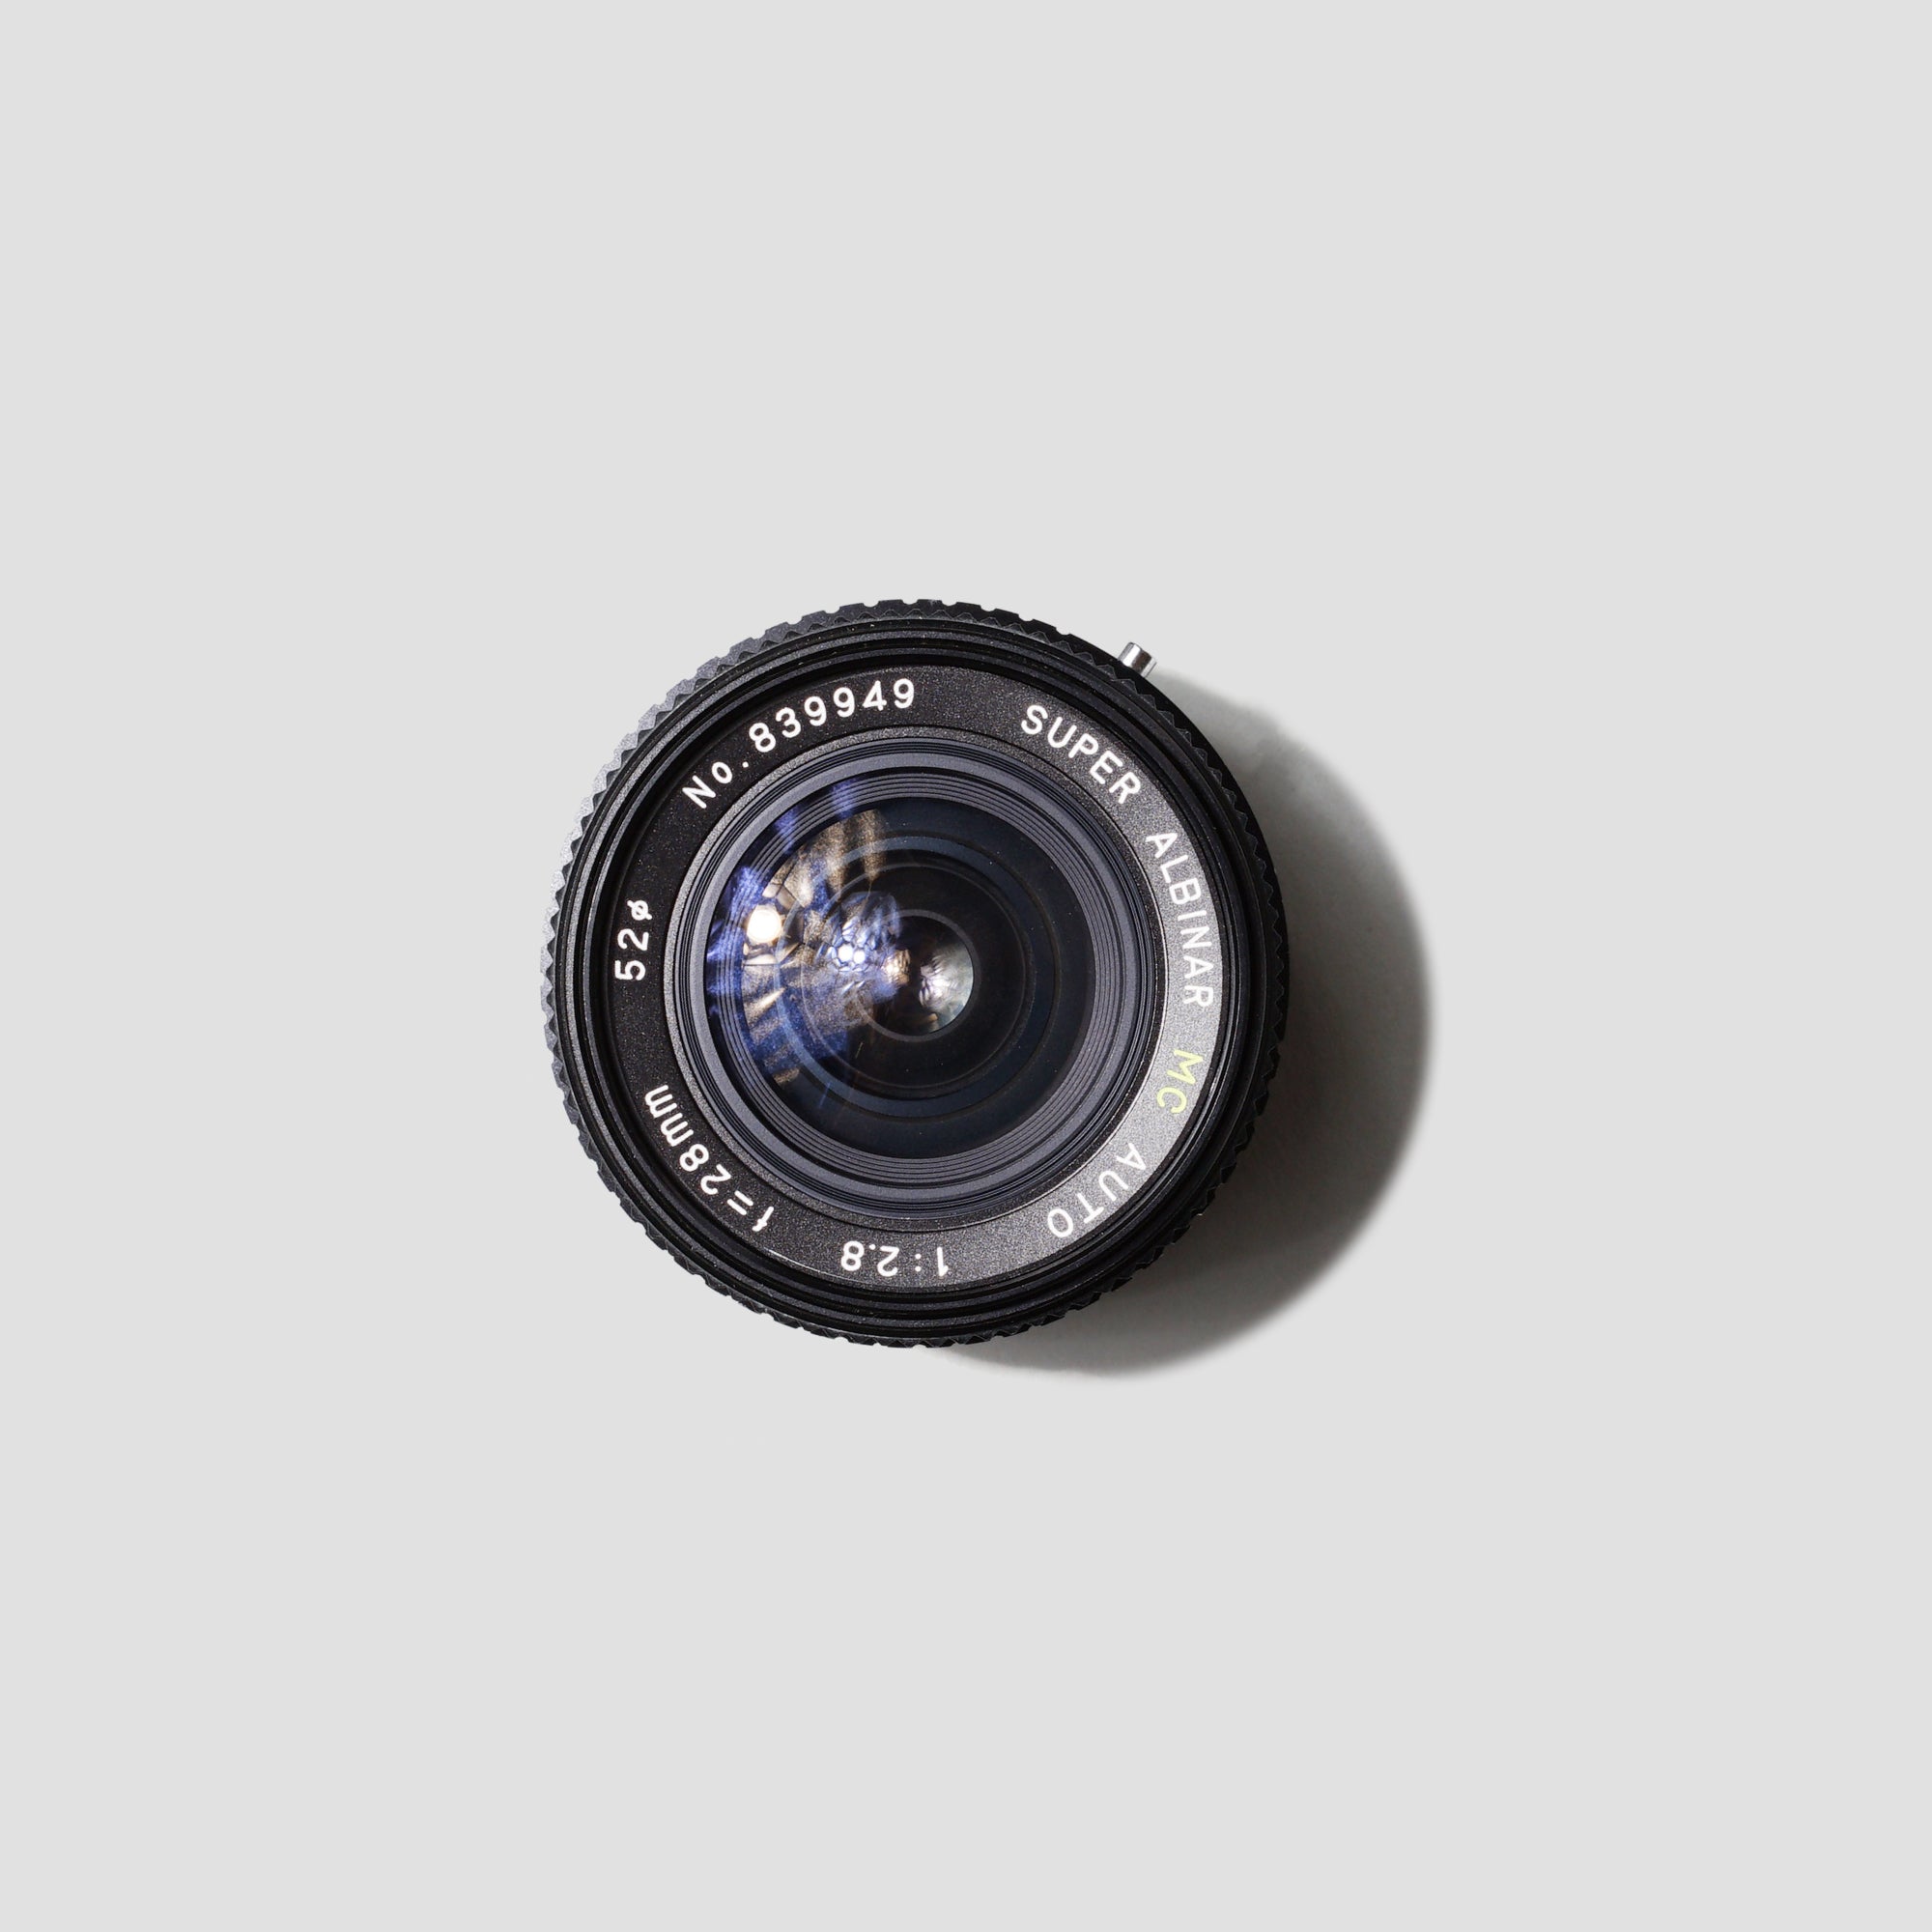 Buy Super Albinar 28mm 2.8 now at Analogue Amsterdam